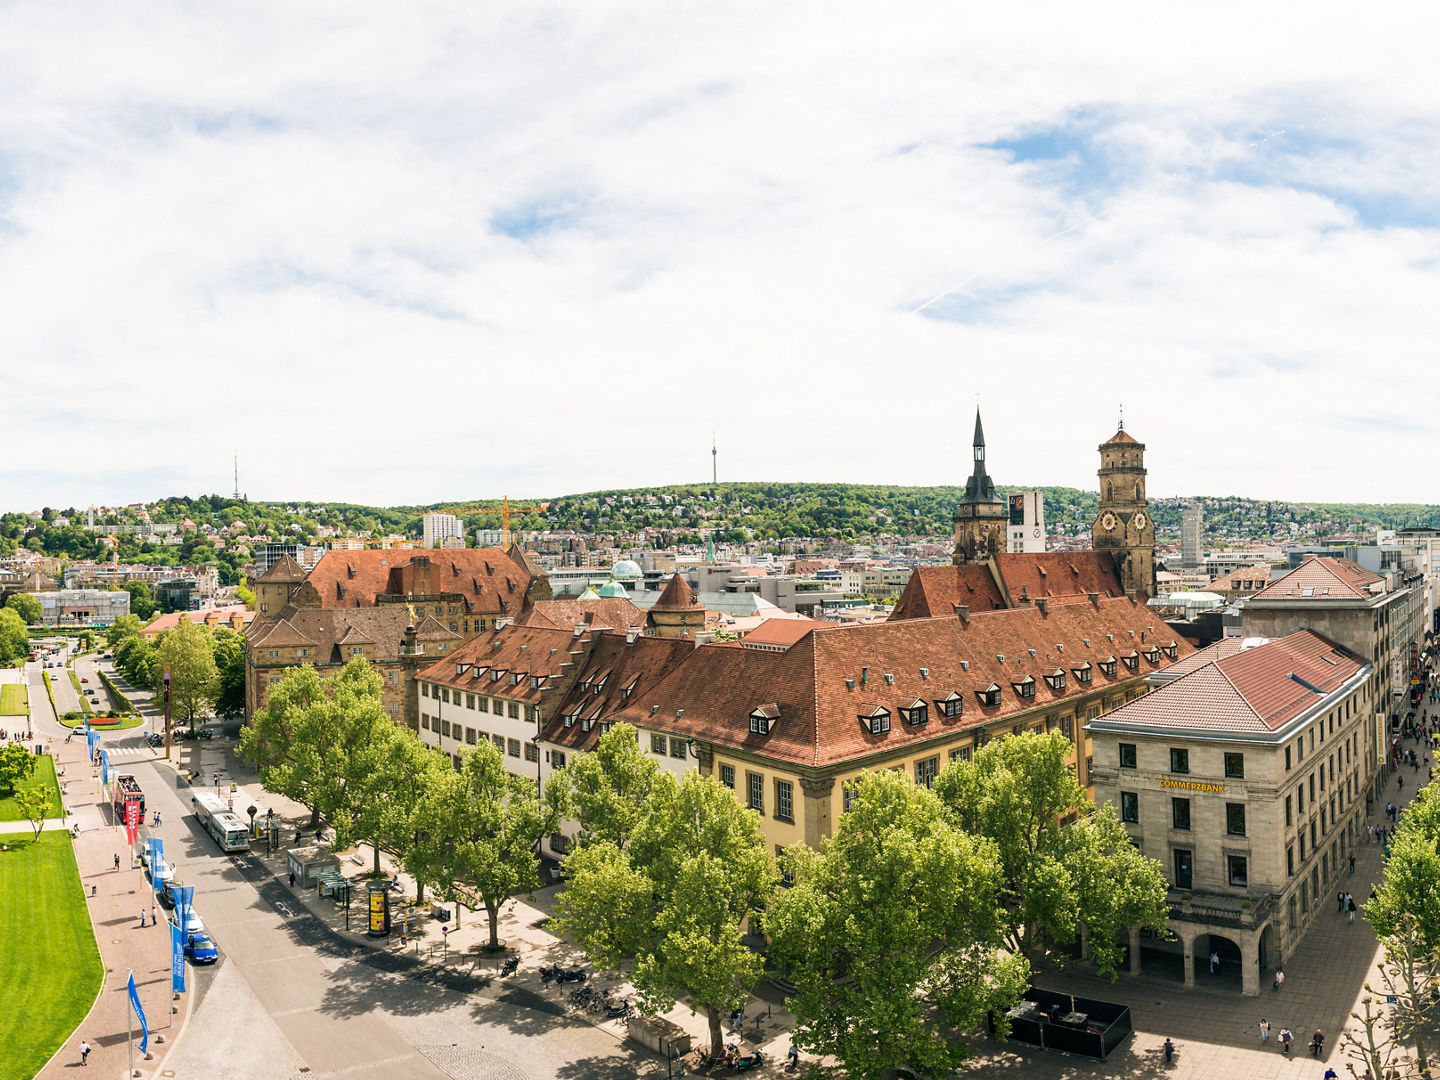 A panoramic view of the Koenigstrasse and Schlossplatz in Stuttgart's center, taken from a height of about 30m using a firetruck ladder.